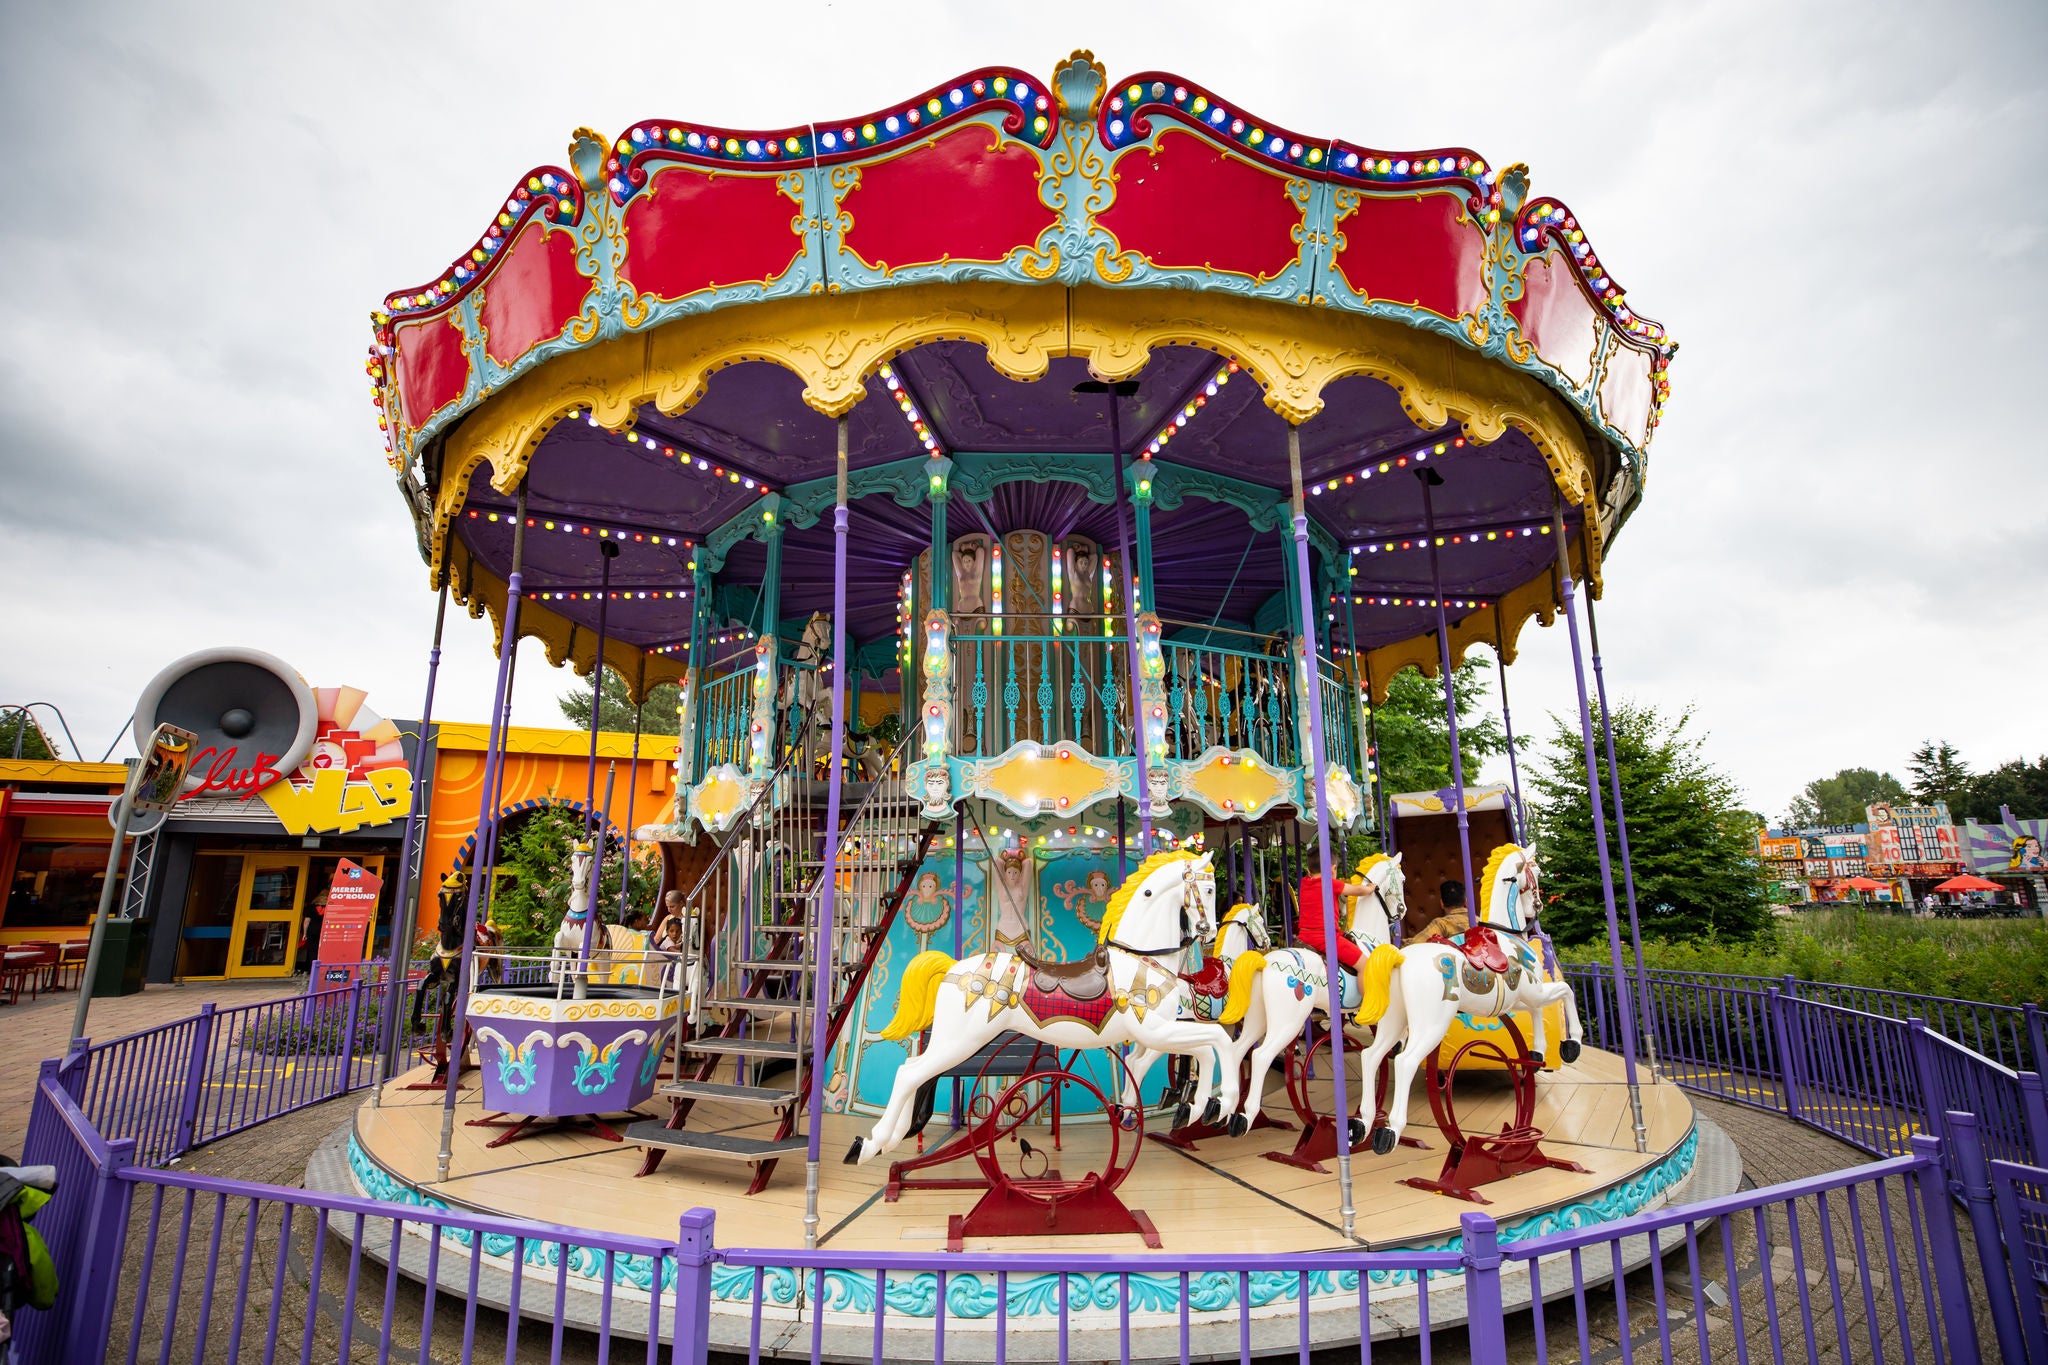 The colorful attraction of Merrie go'round in Walibi Holland, on the first floor we can see poneys 